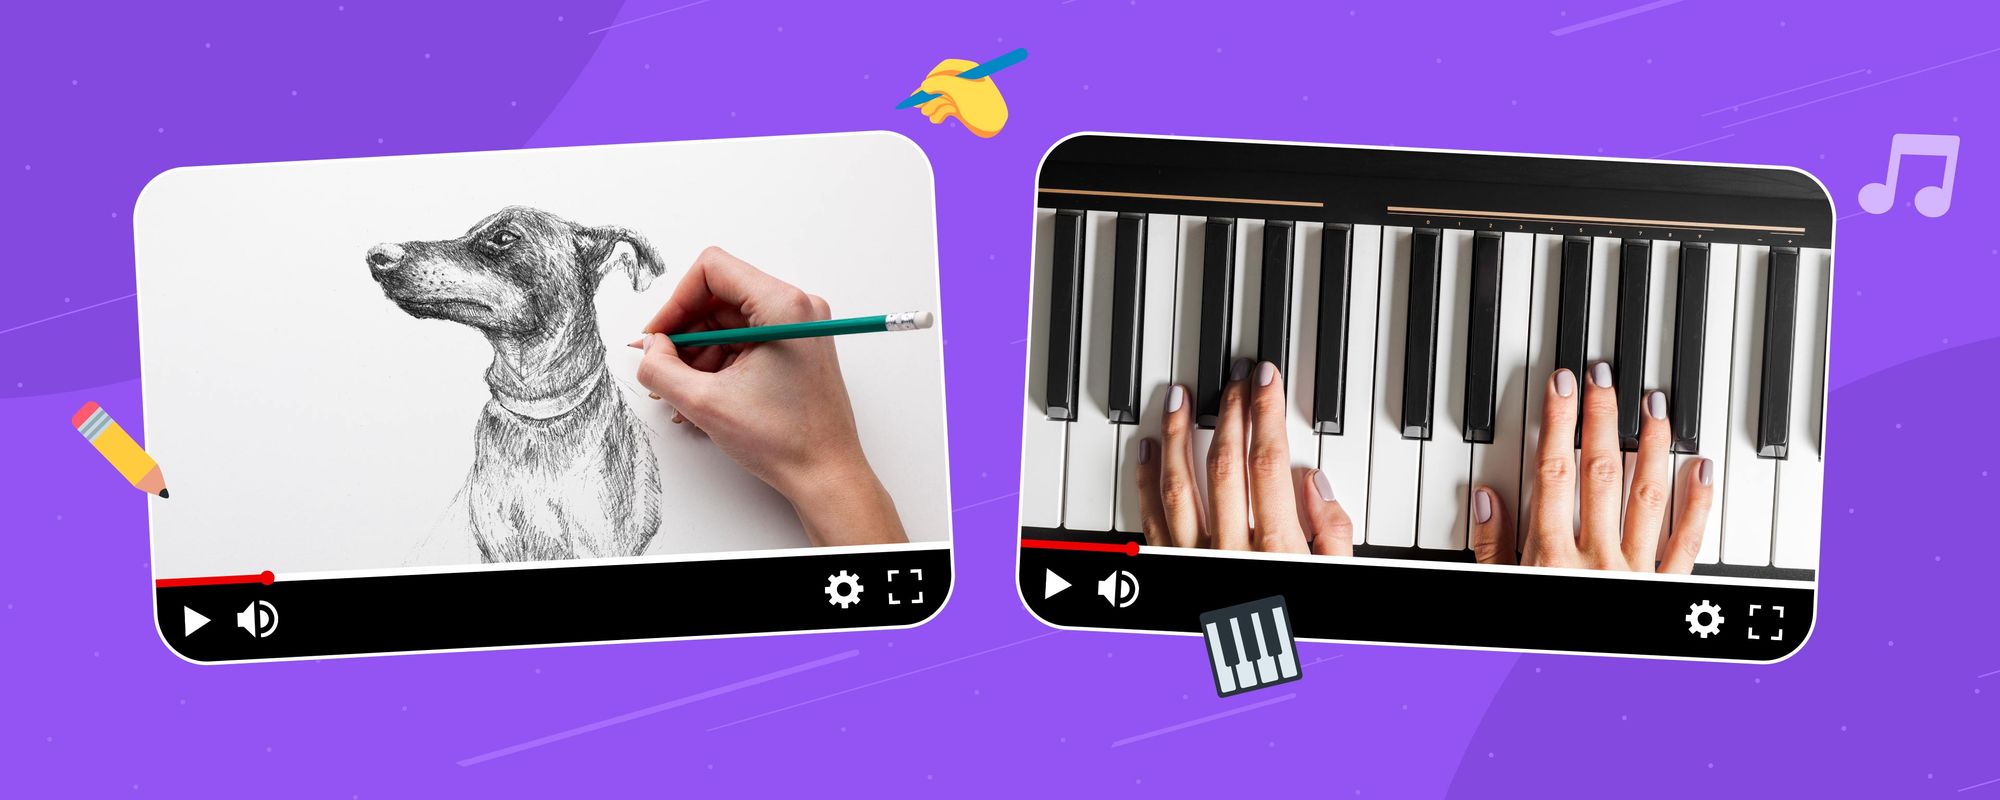 Examples of creative faceless YouTube channel ideas, including drawing and playing music.